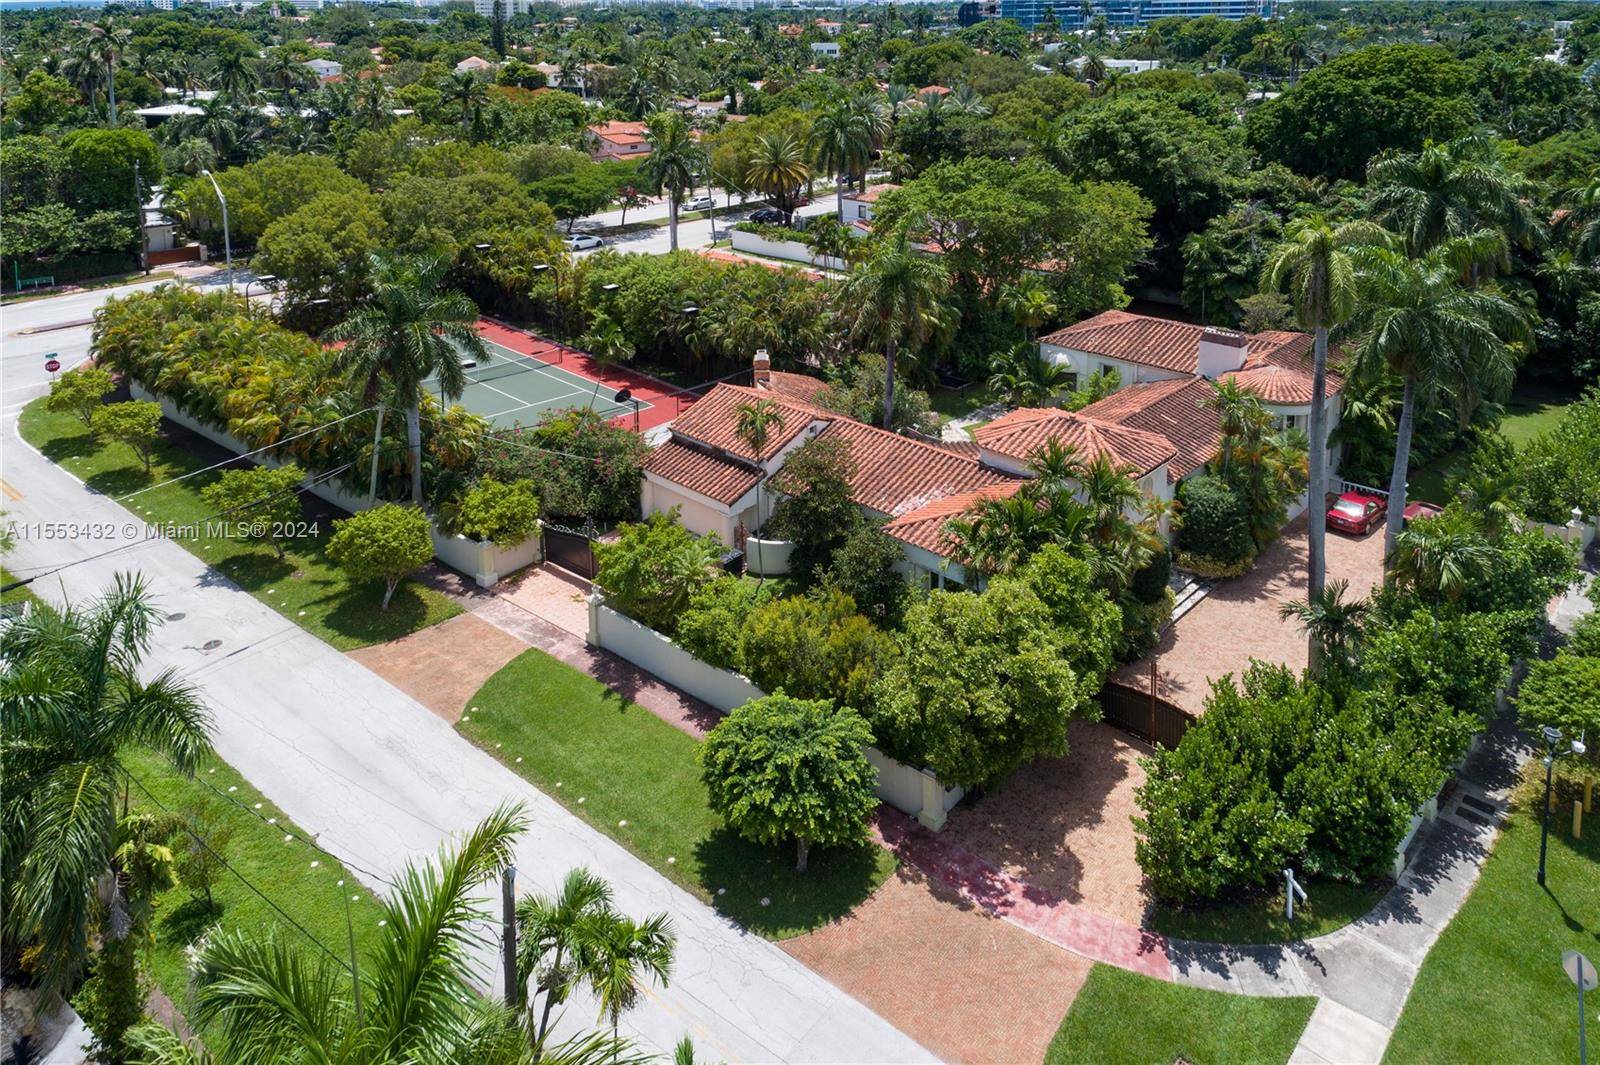 Rare opportunity to own one of the largest properties in Miami Beach.